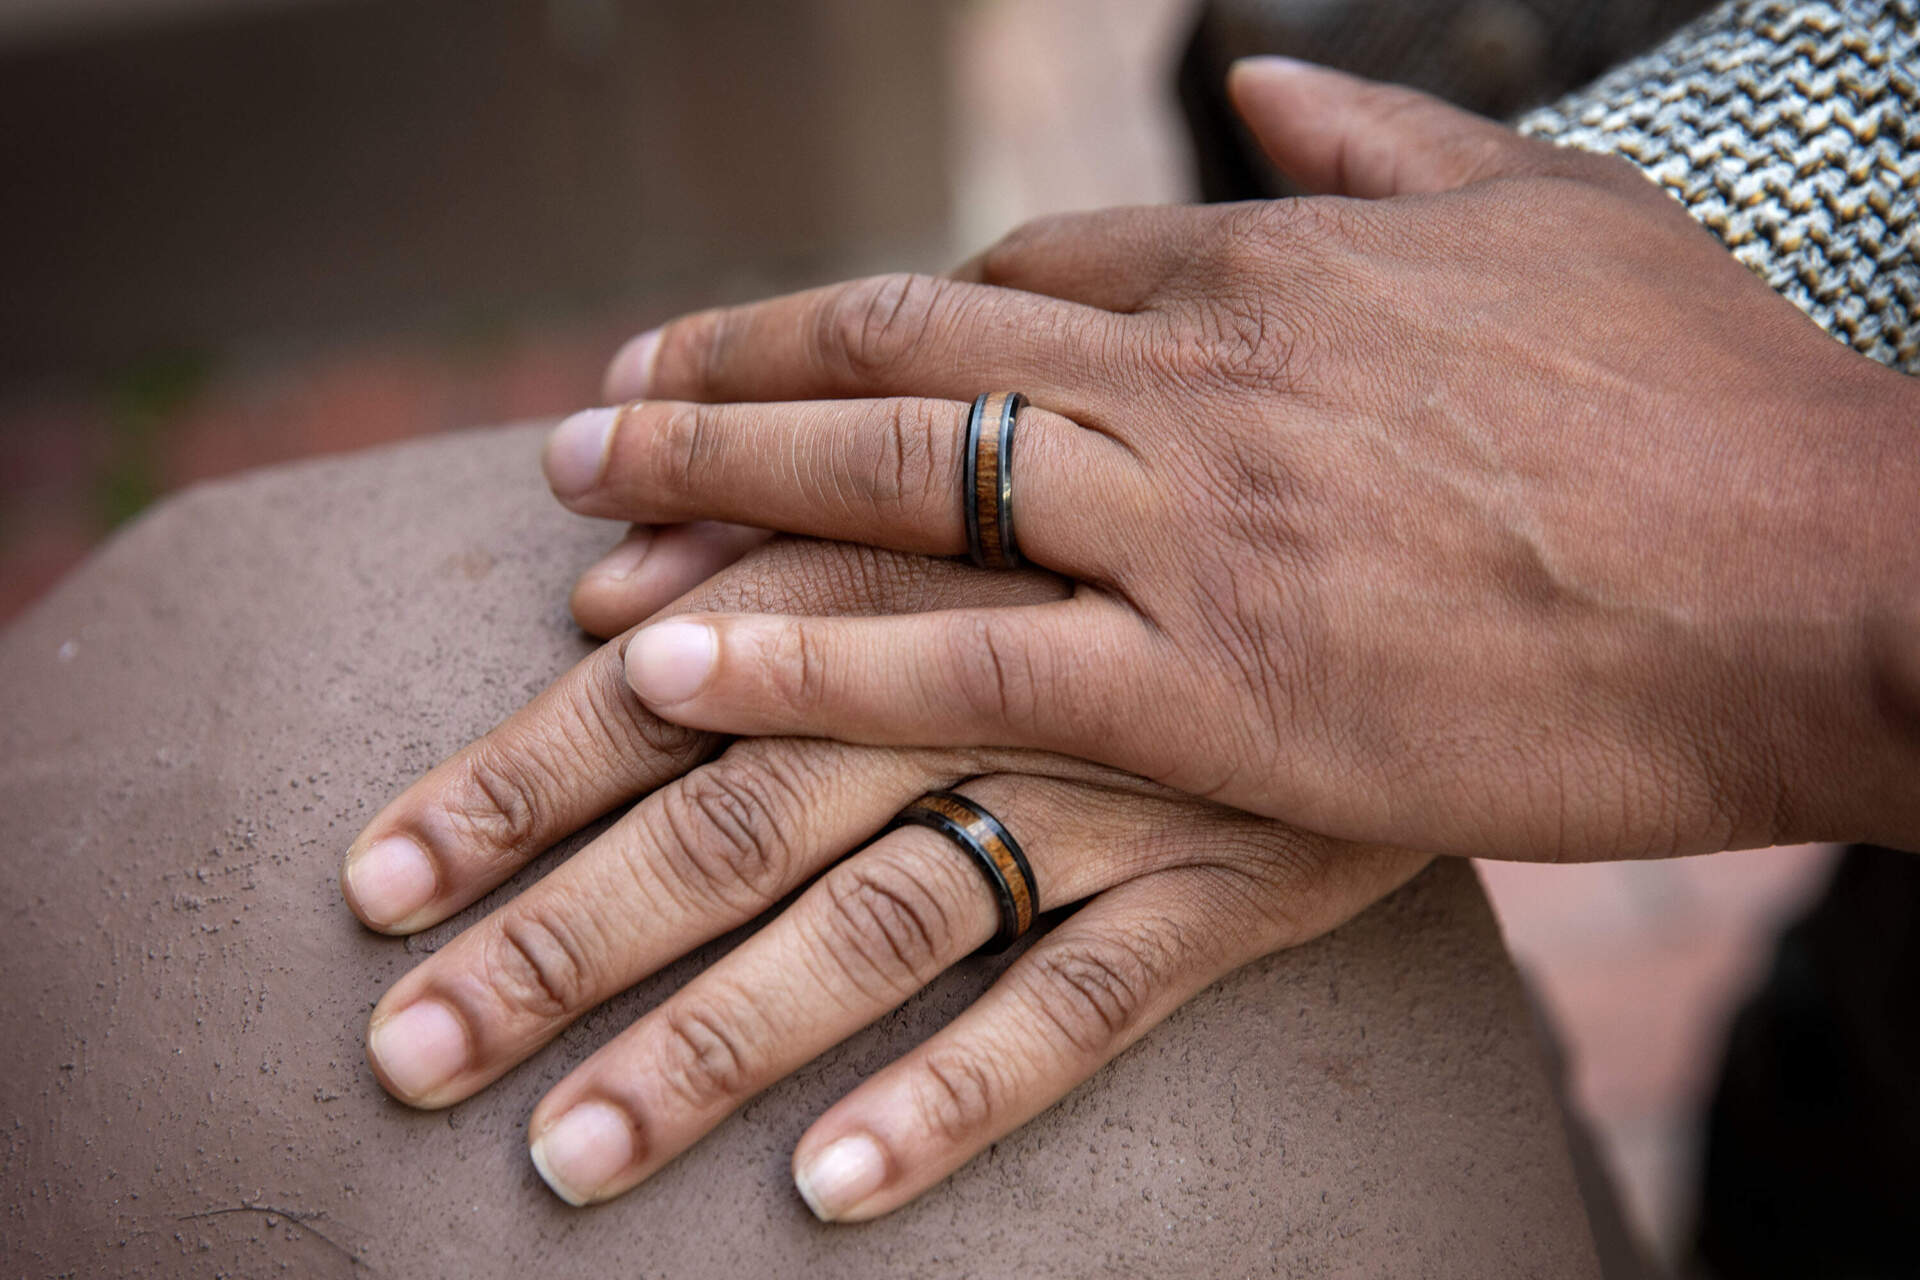 Quincey J. Roberts' and Corey Yarbrough's wedding rings. (Robin Lubbock/WBUR)